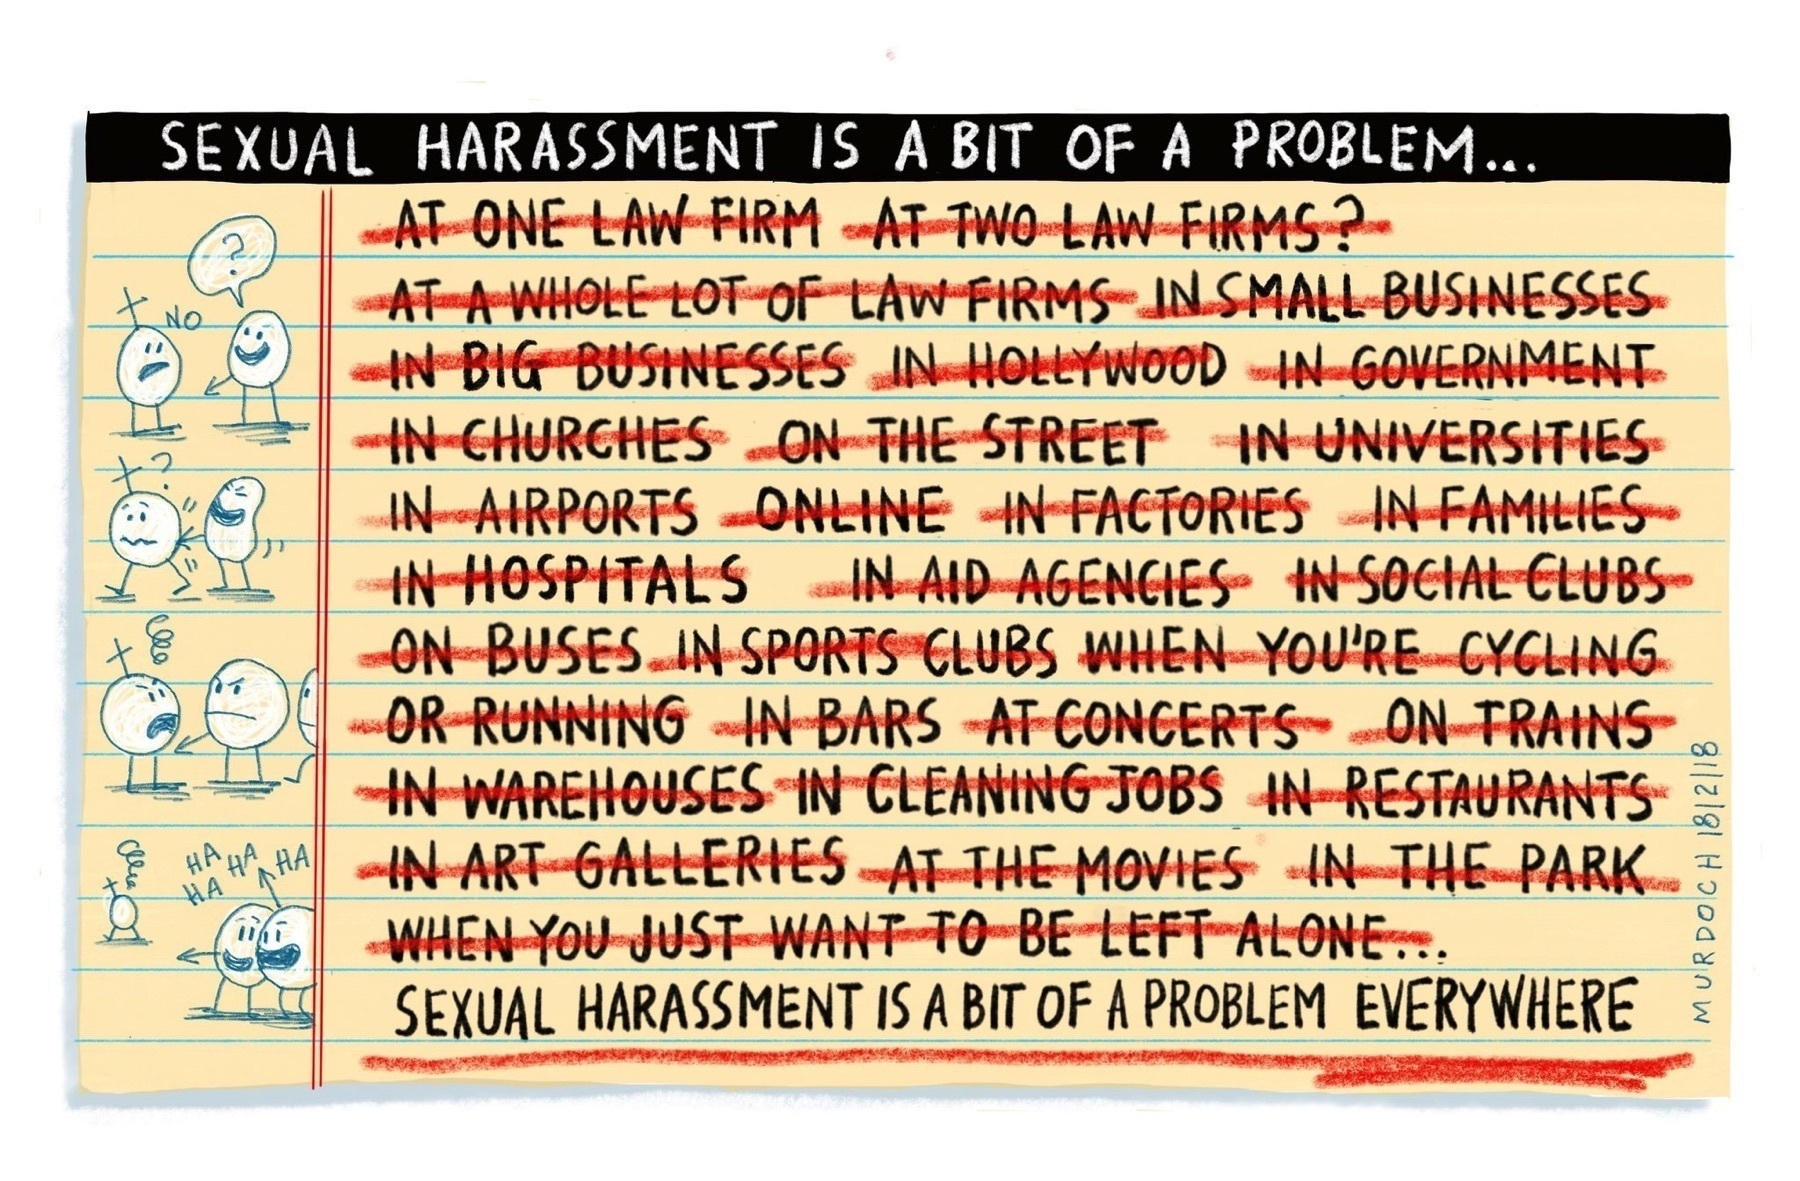 Long list of places where sexual harassment is a problem, all crossed out and replaced with ‘everywhere’.